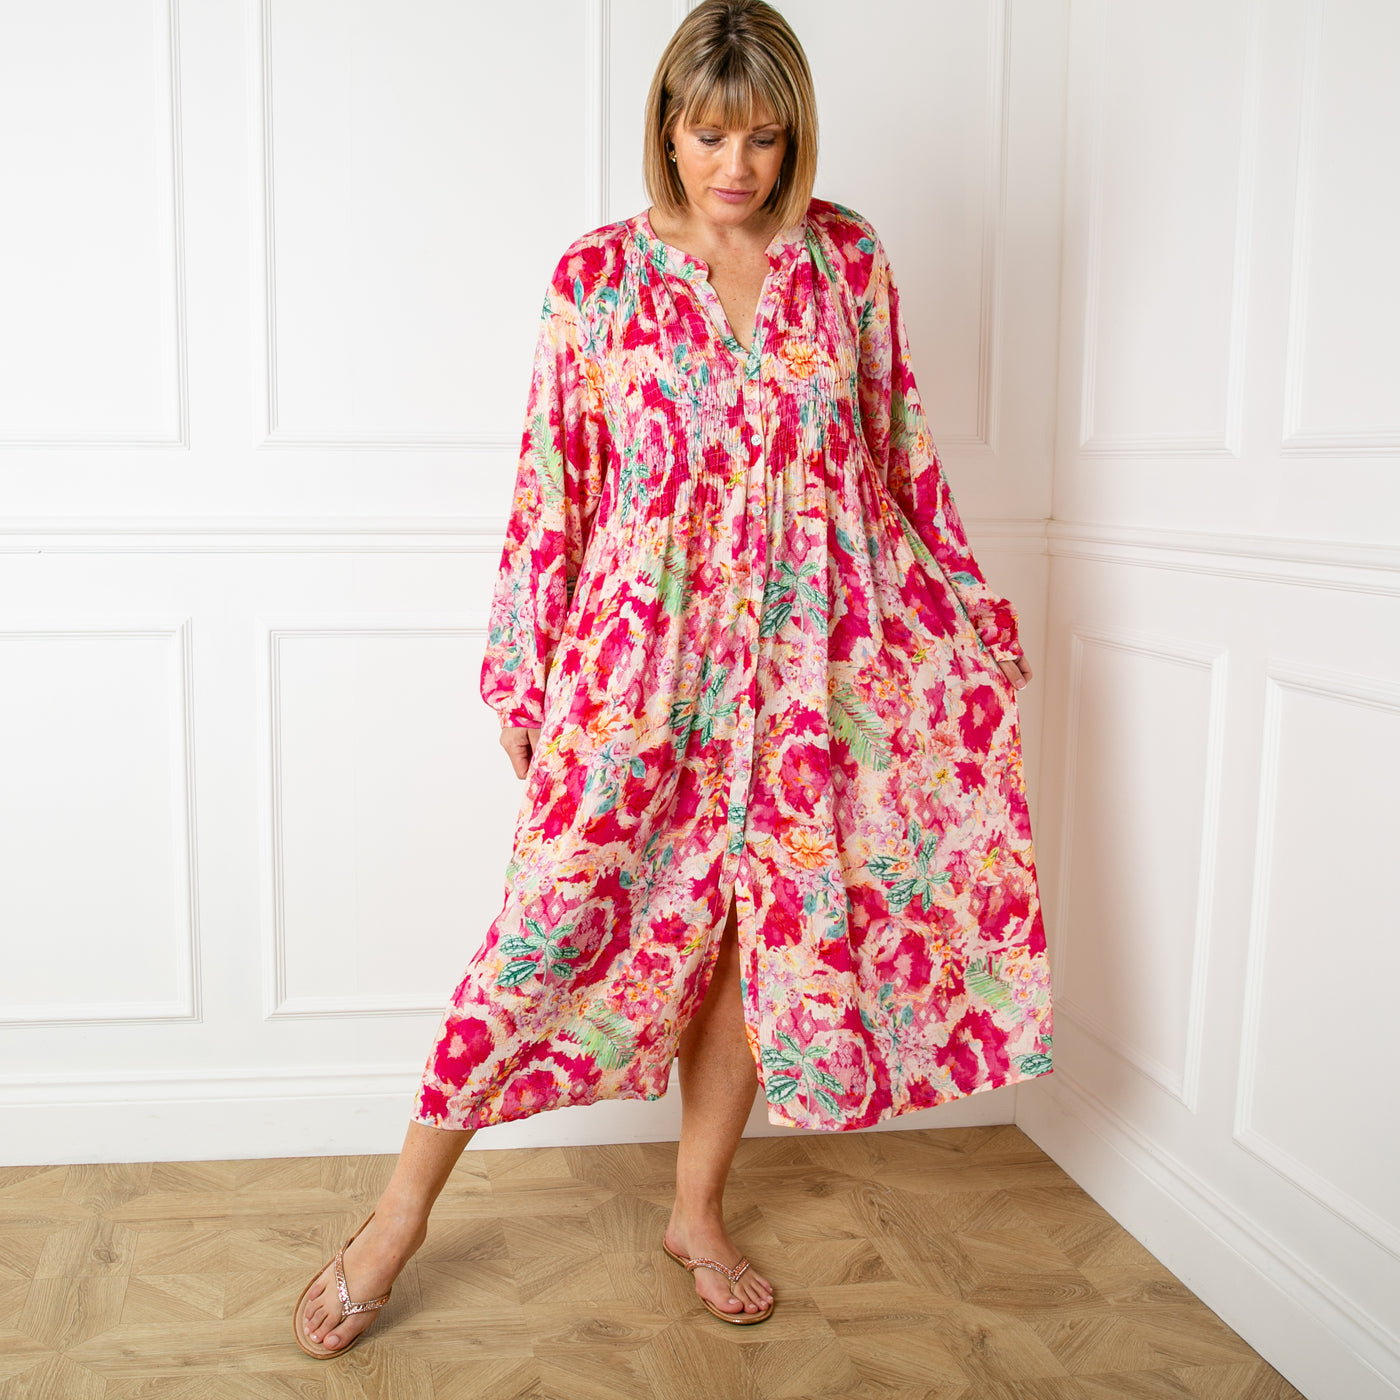 The pink Wild Garden Maxi Dress made from a lightweight viscose material in a beautiful detailed floral print pattern